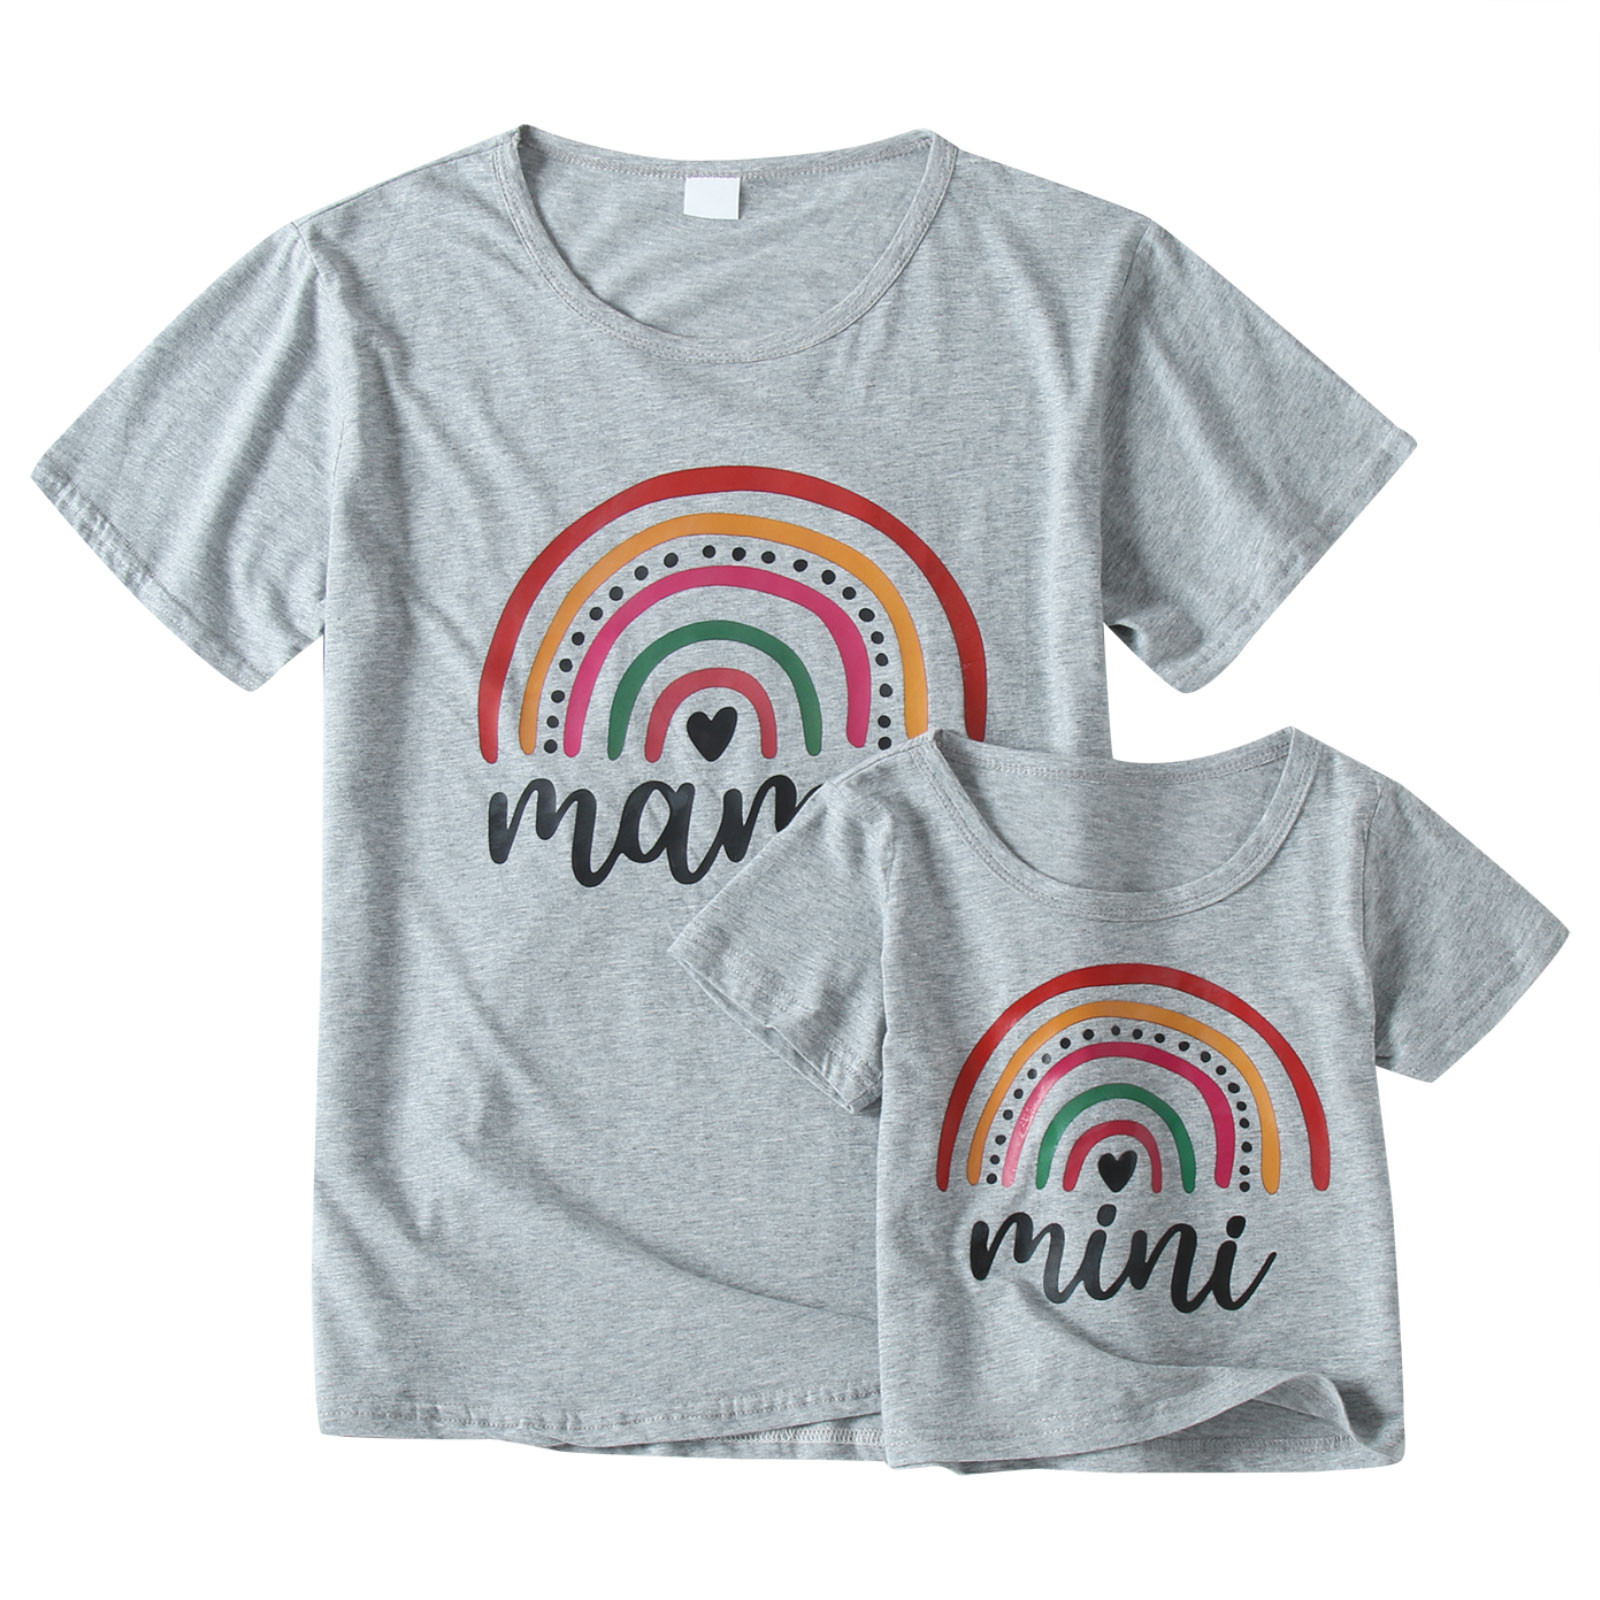 TAIAOJING Mommy and Me Outfits T Short Tops And Blouse Casual Kids Me Summer Clothes Shirt Outfits Sleeve Family Baby Mommy For Toddler Rainbow Tee Girls Girls Tops 2-3 Years - image 3 of 9